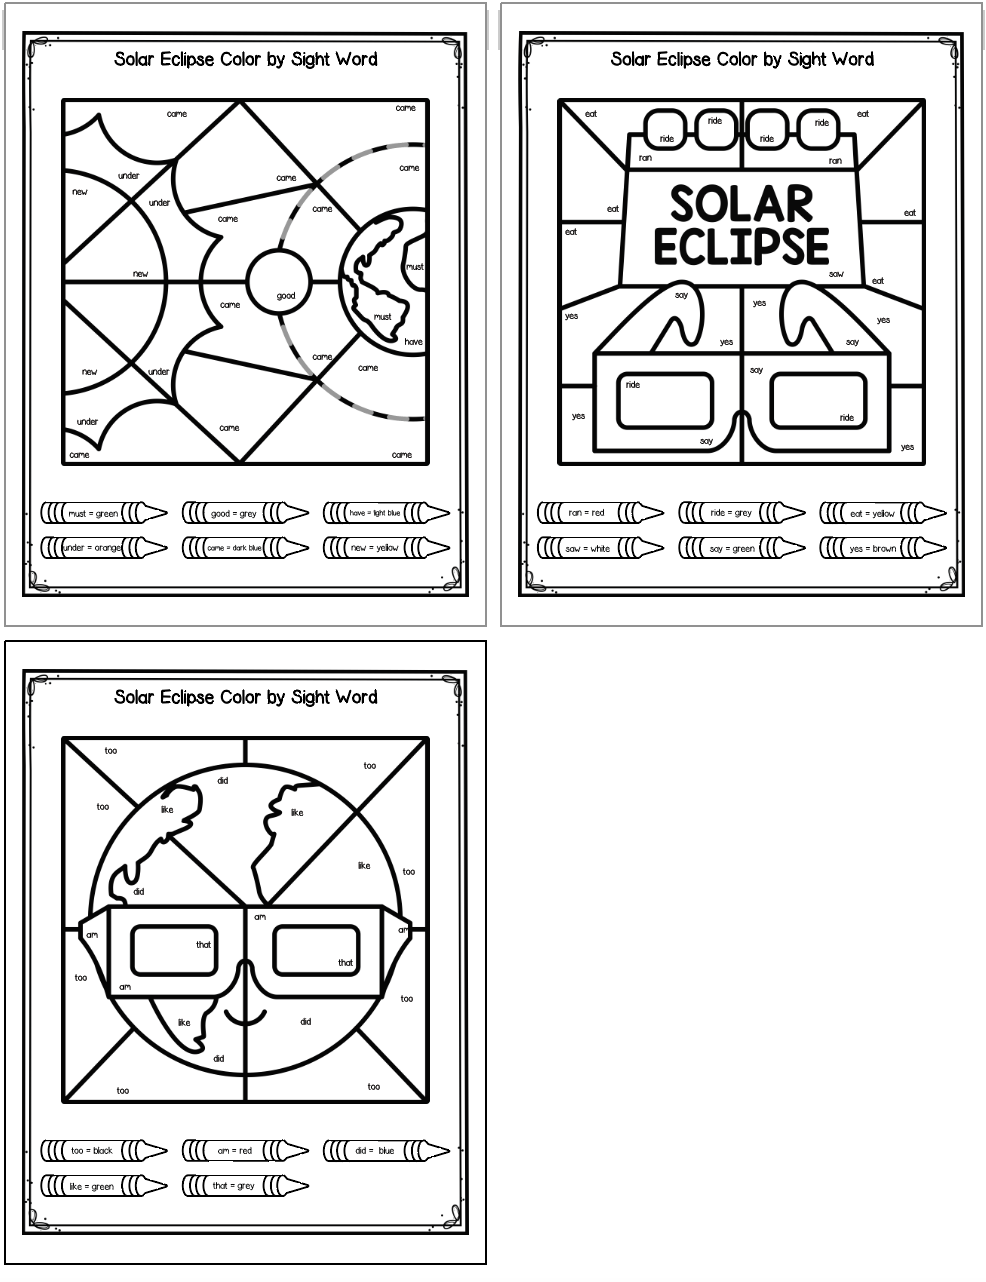 Three color by sight word eclipse pages including: the anatomy of an eclipse, solar eclipse glasses, and the earth wearing glasses